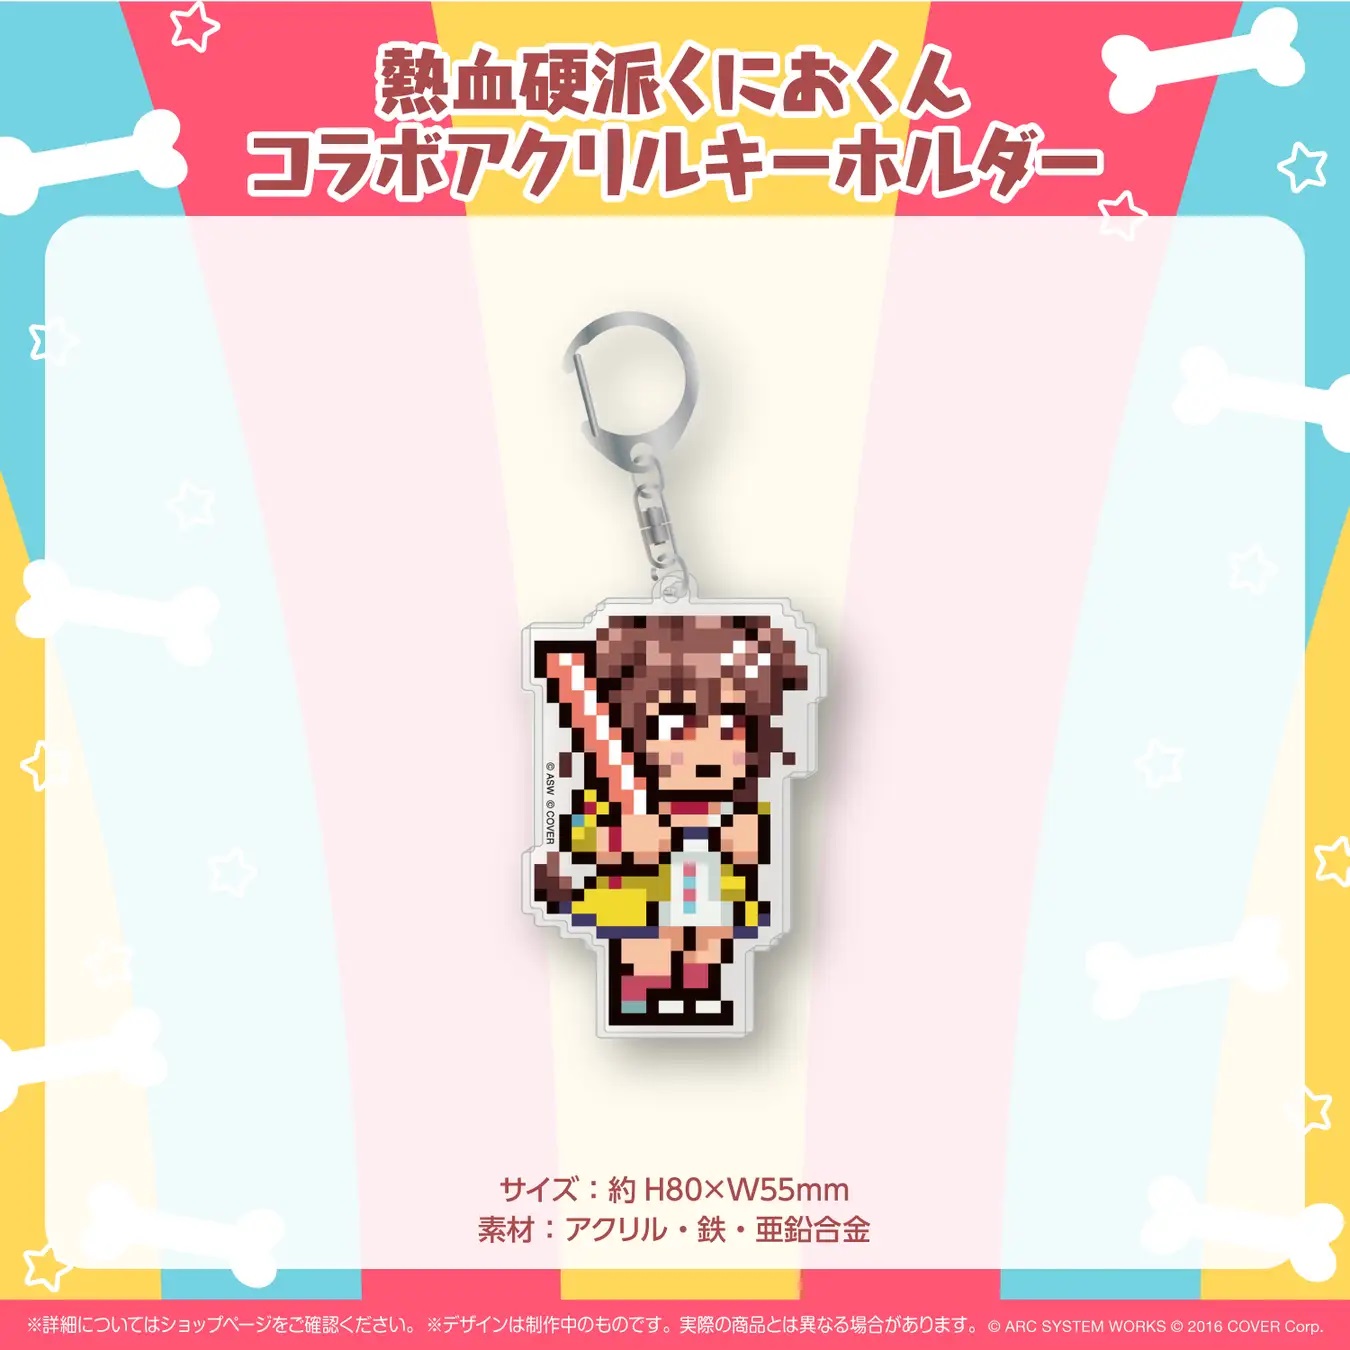 A promotional image of the Inugami Korone x Kunio-kun collaboration acrylic keychain, featuring a pixel-art version of Korone wielding a stick.